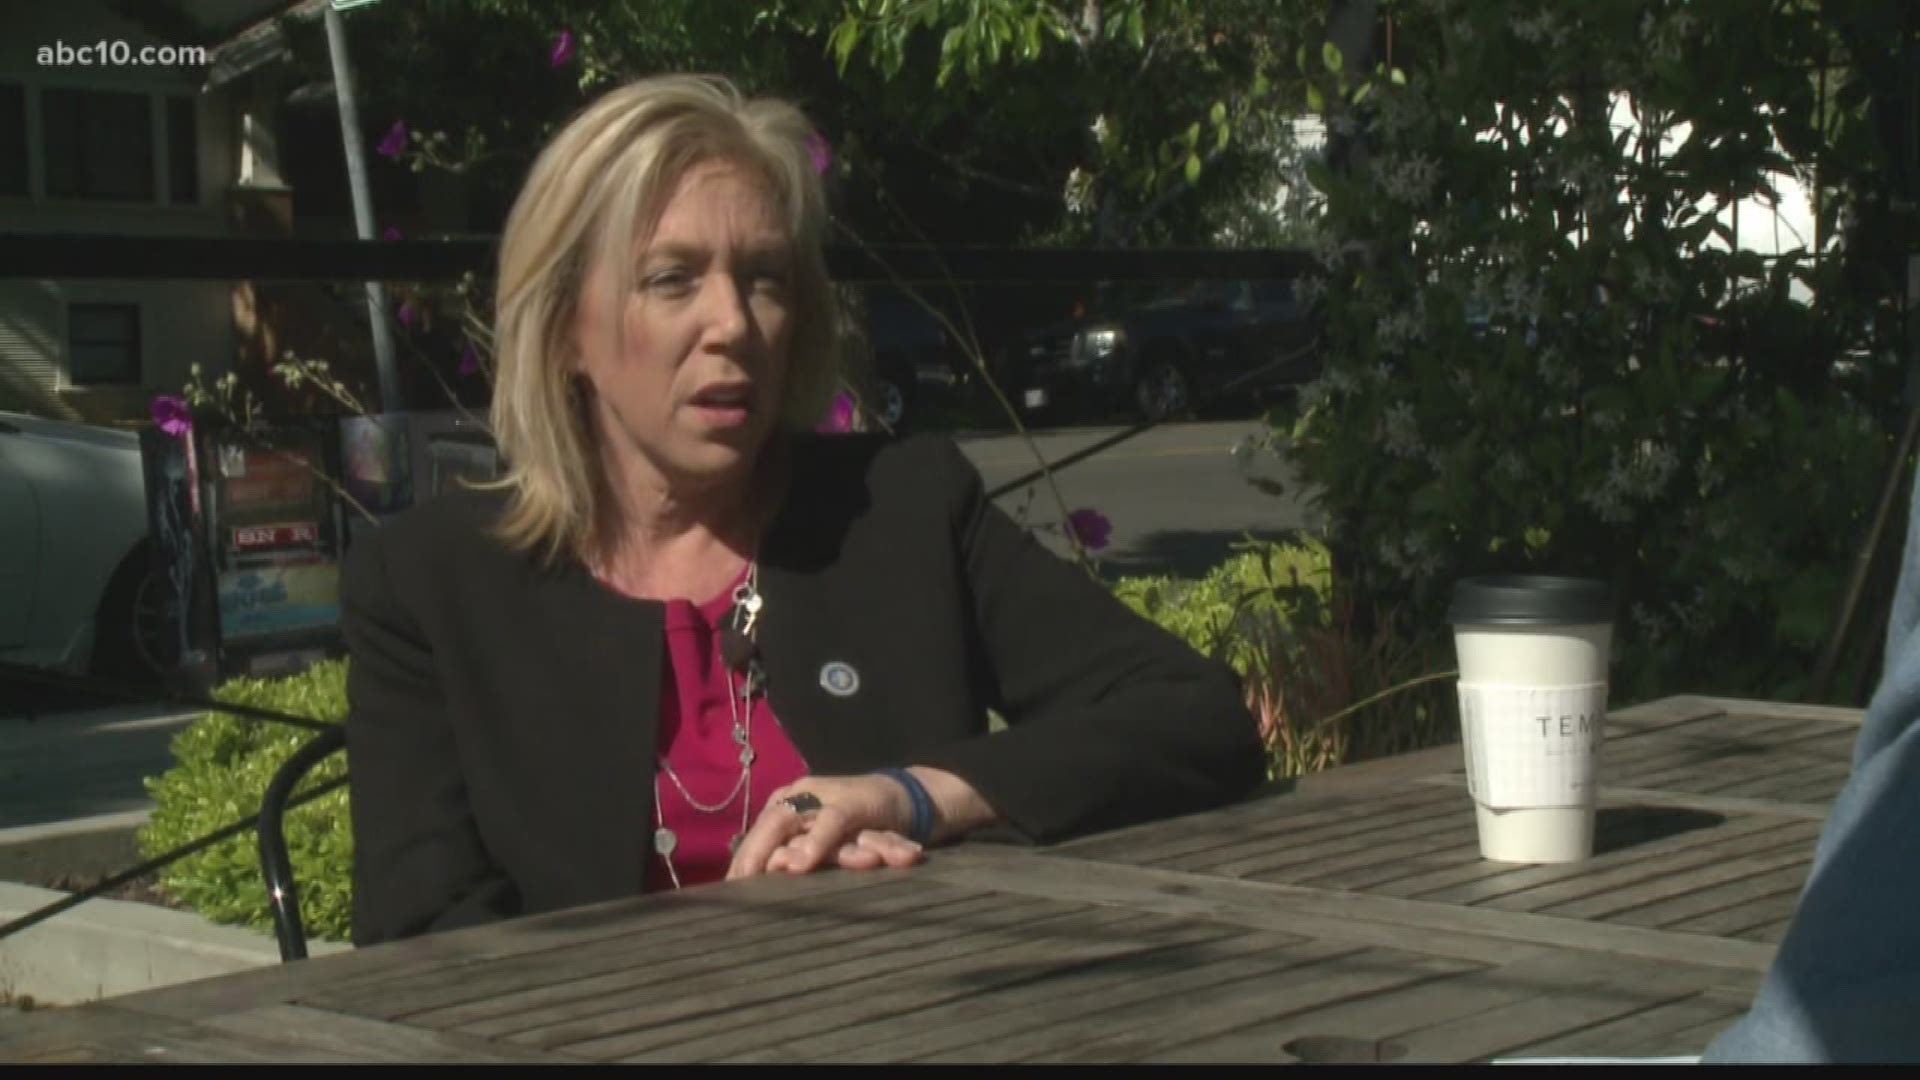 Walt Gray sat down with Sacramento County District Attorney Anne Marie-Schubert to talk about the Stephon Clark shooting and the protests that followed.